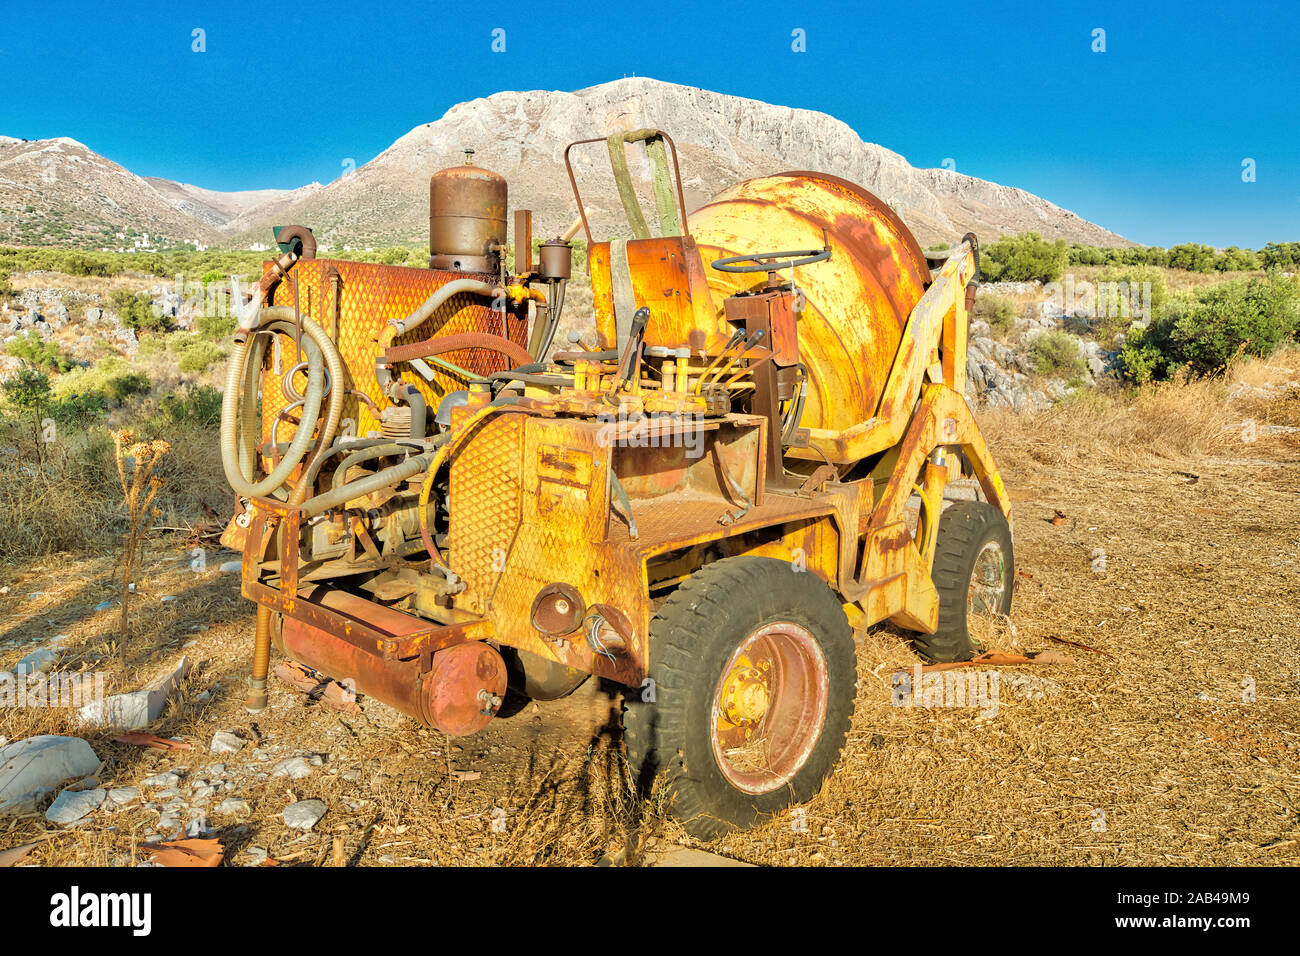 https://c8.alamy.com/comp/2AB49M9/mobile-automatic-self-loading-concrete-mixer-little-yellow-truck-automixer-for-mines-and-pits-for-building-work-in-a-suggestive-mining-site-mining-2AB49M9.jpg